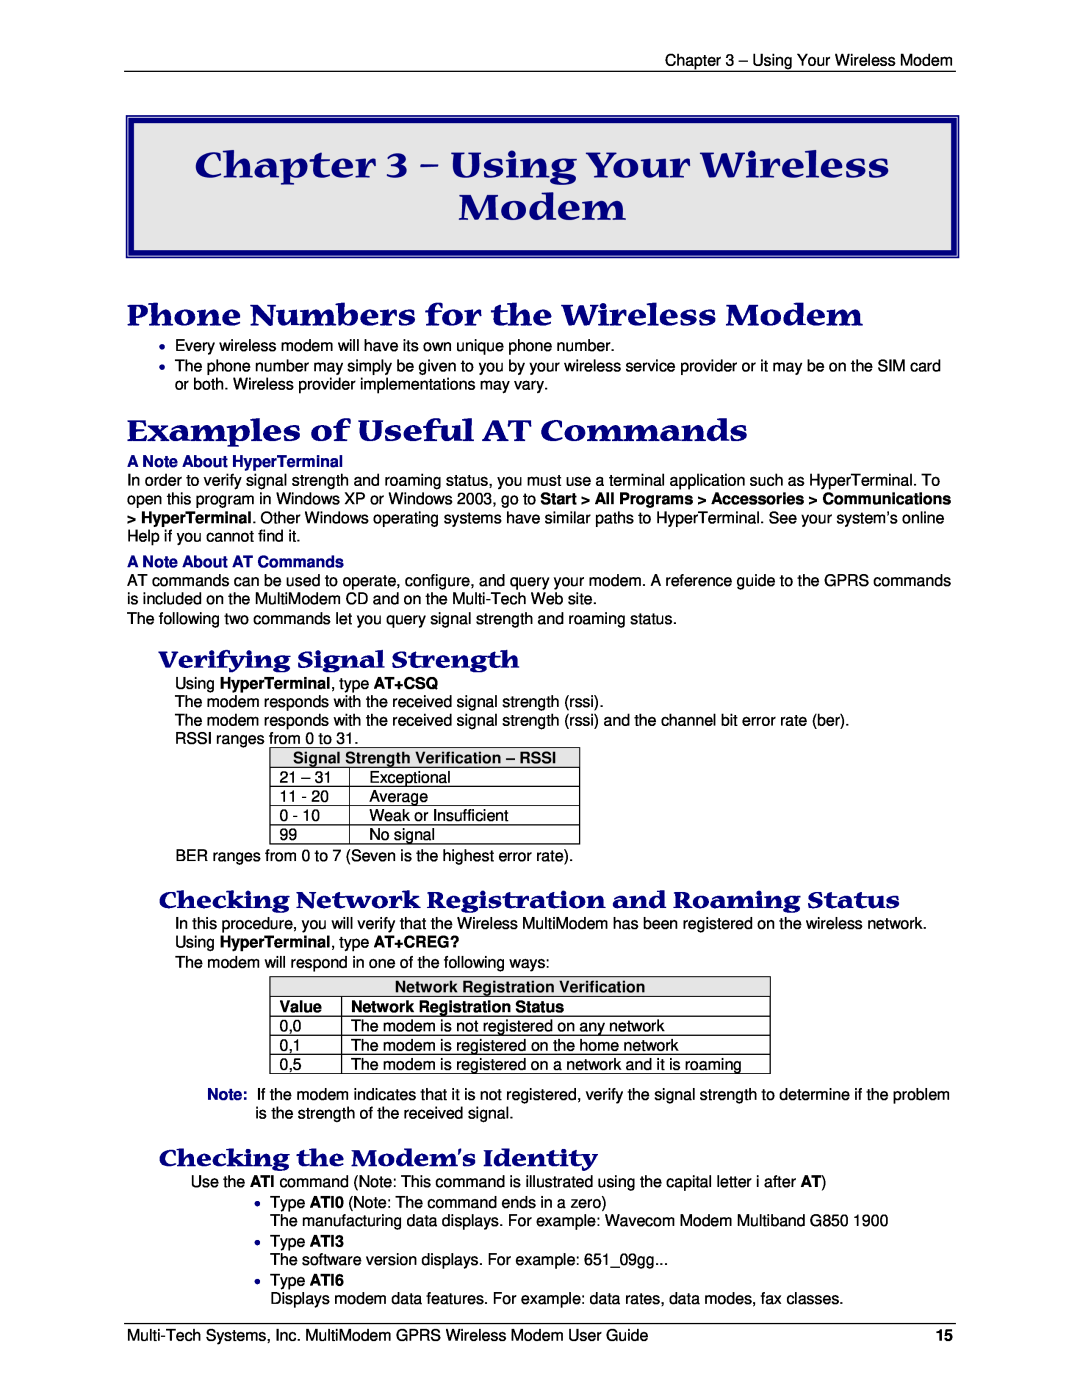 Multi-Tech Systems MTCBA-G-F4 Using Your Wireless Modem, Phone Numbers for the Wireless Modem, Verifying Signal Strength 